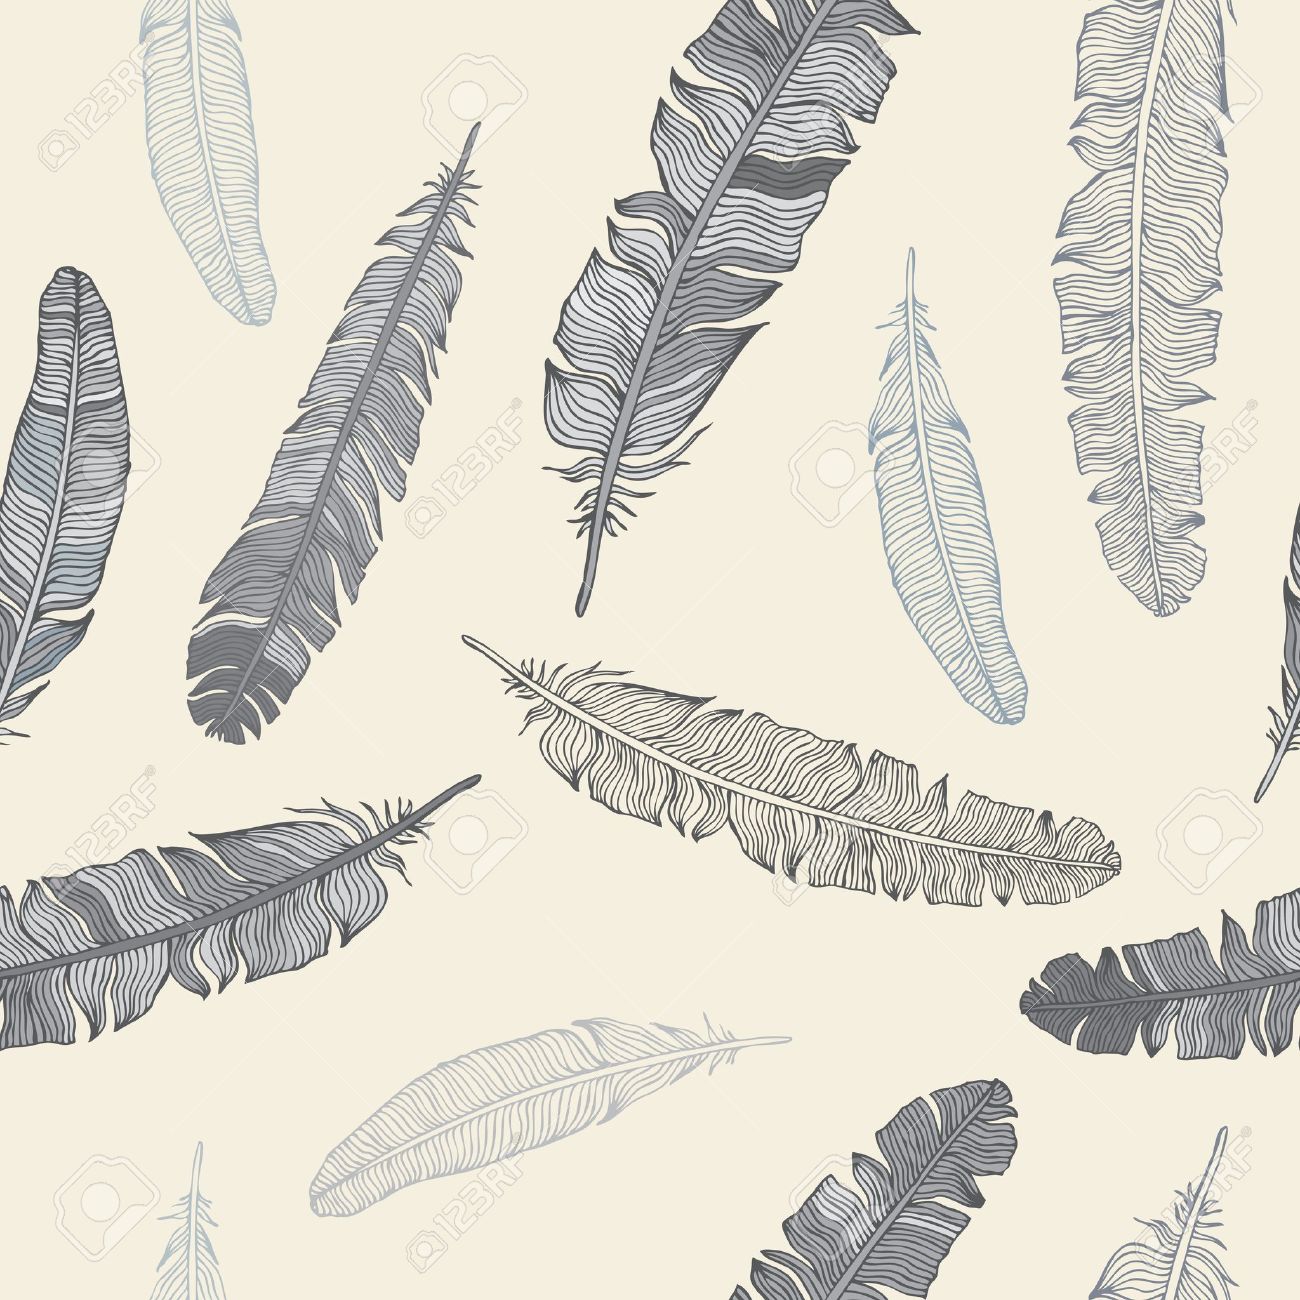 Vintage Feather Seamless Background Hand Drawn Illustration